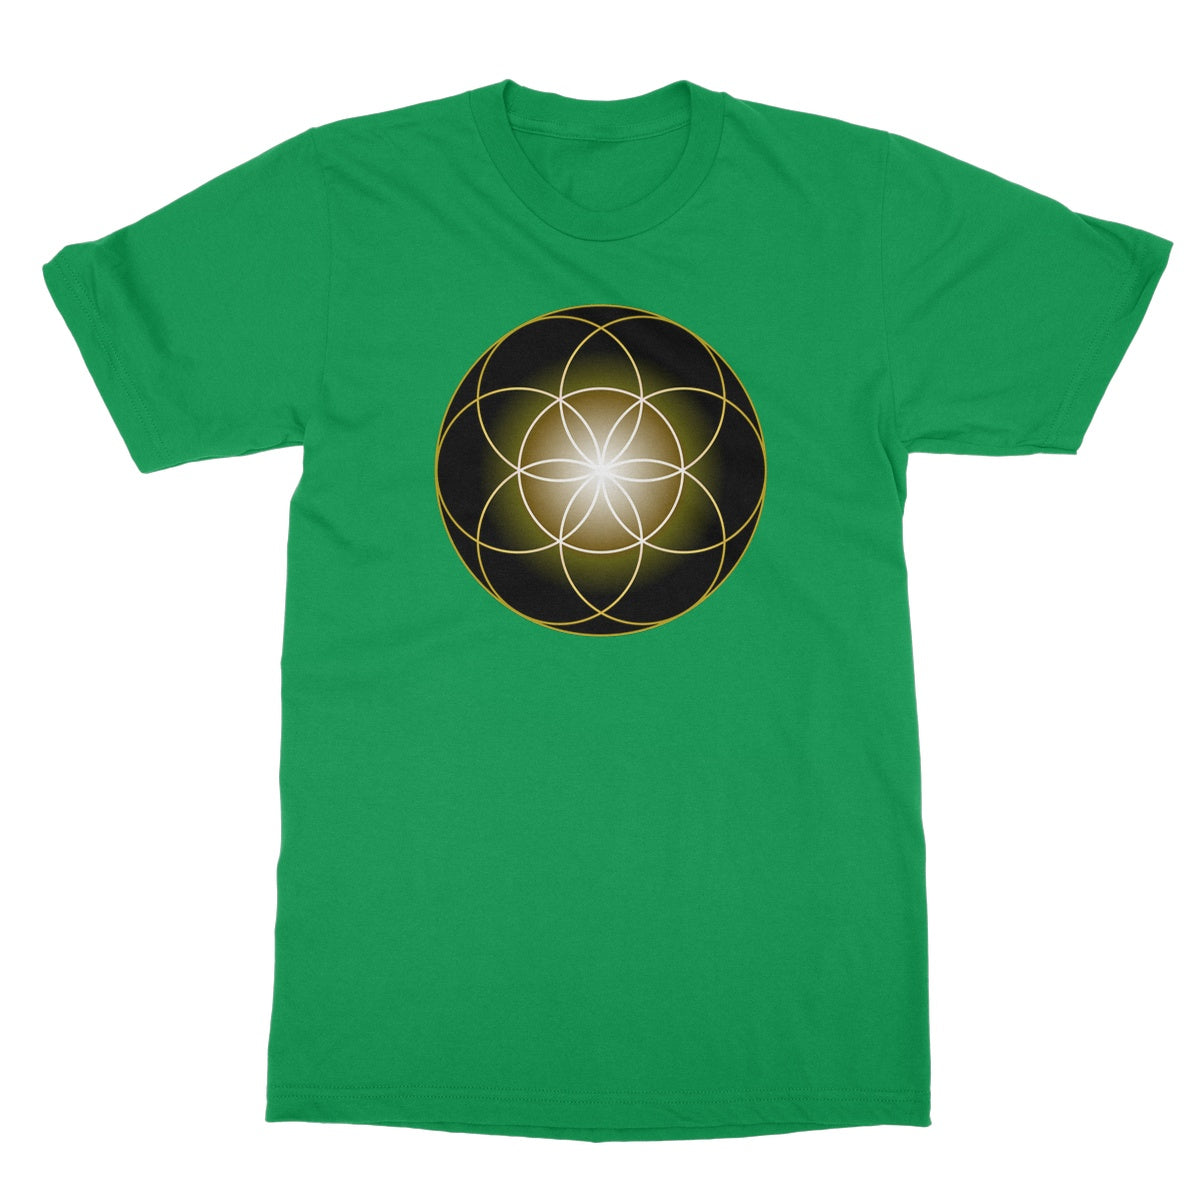 Seed of Life in Gold T-Shirt - Nature of Flowers